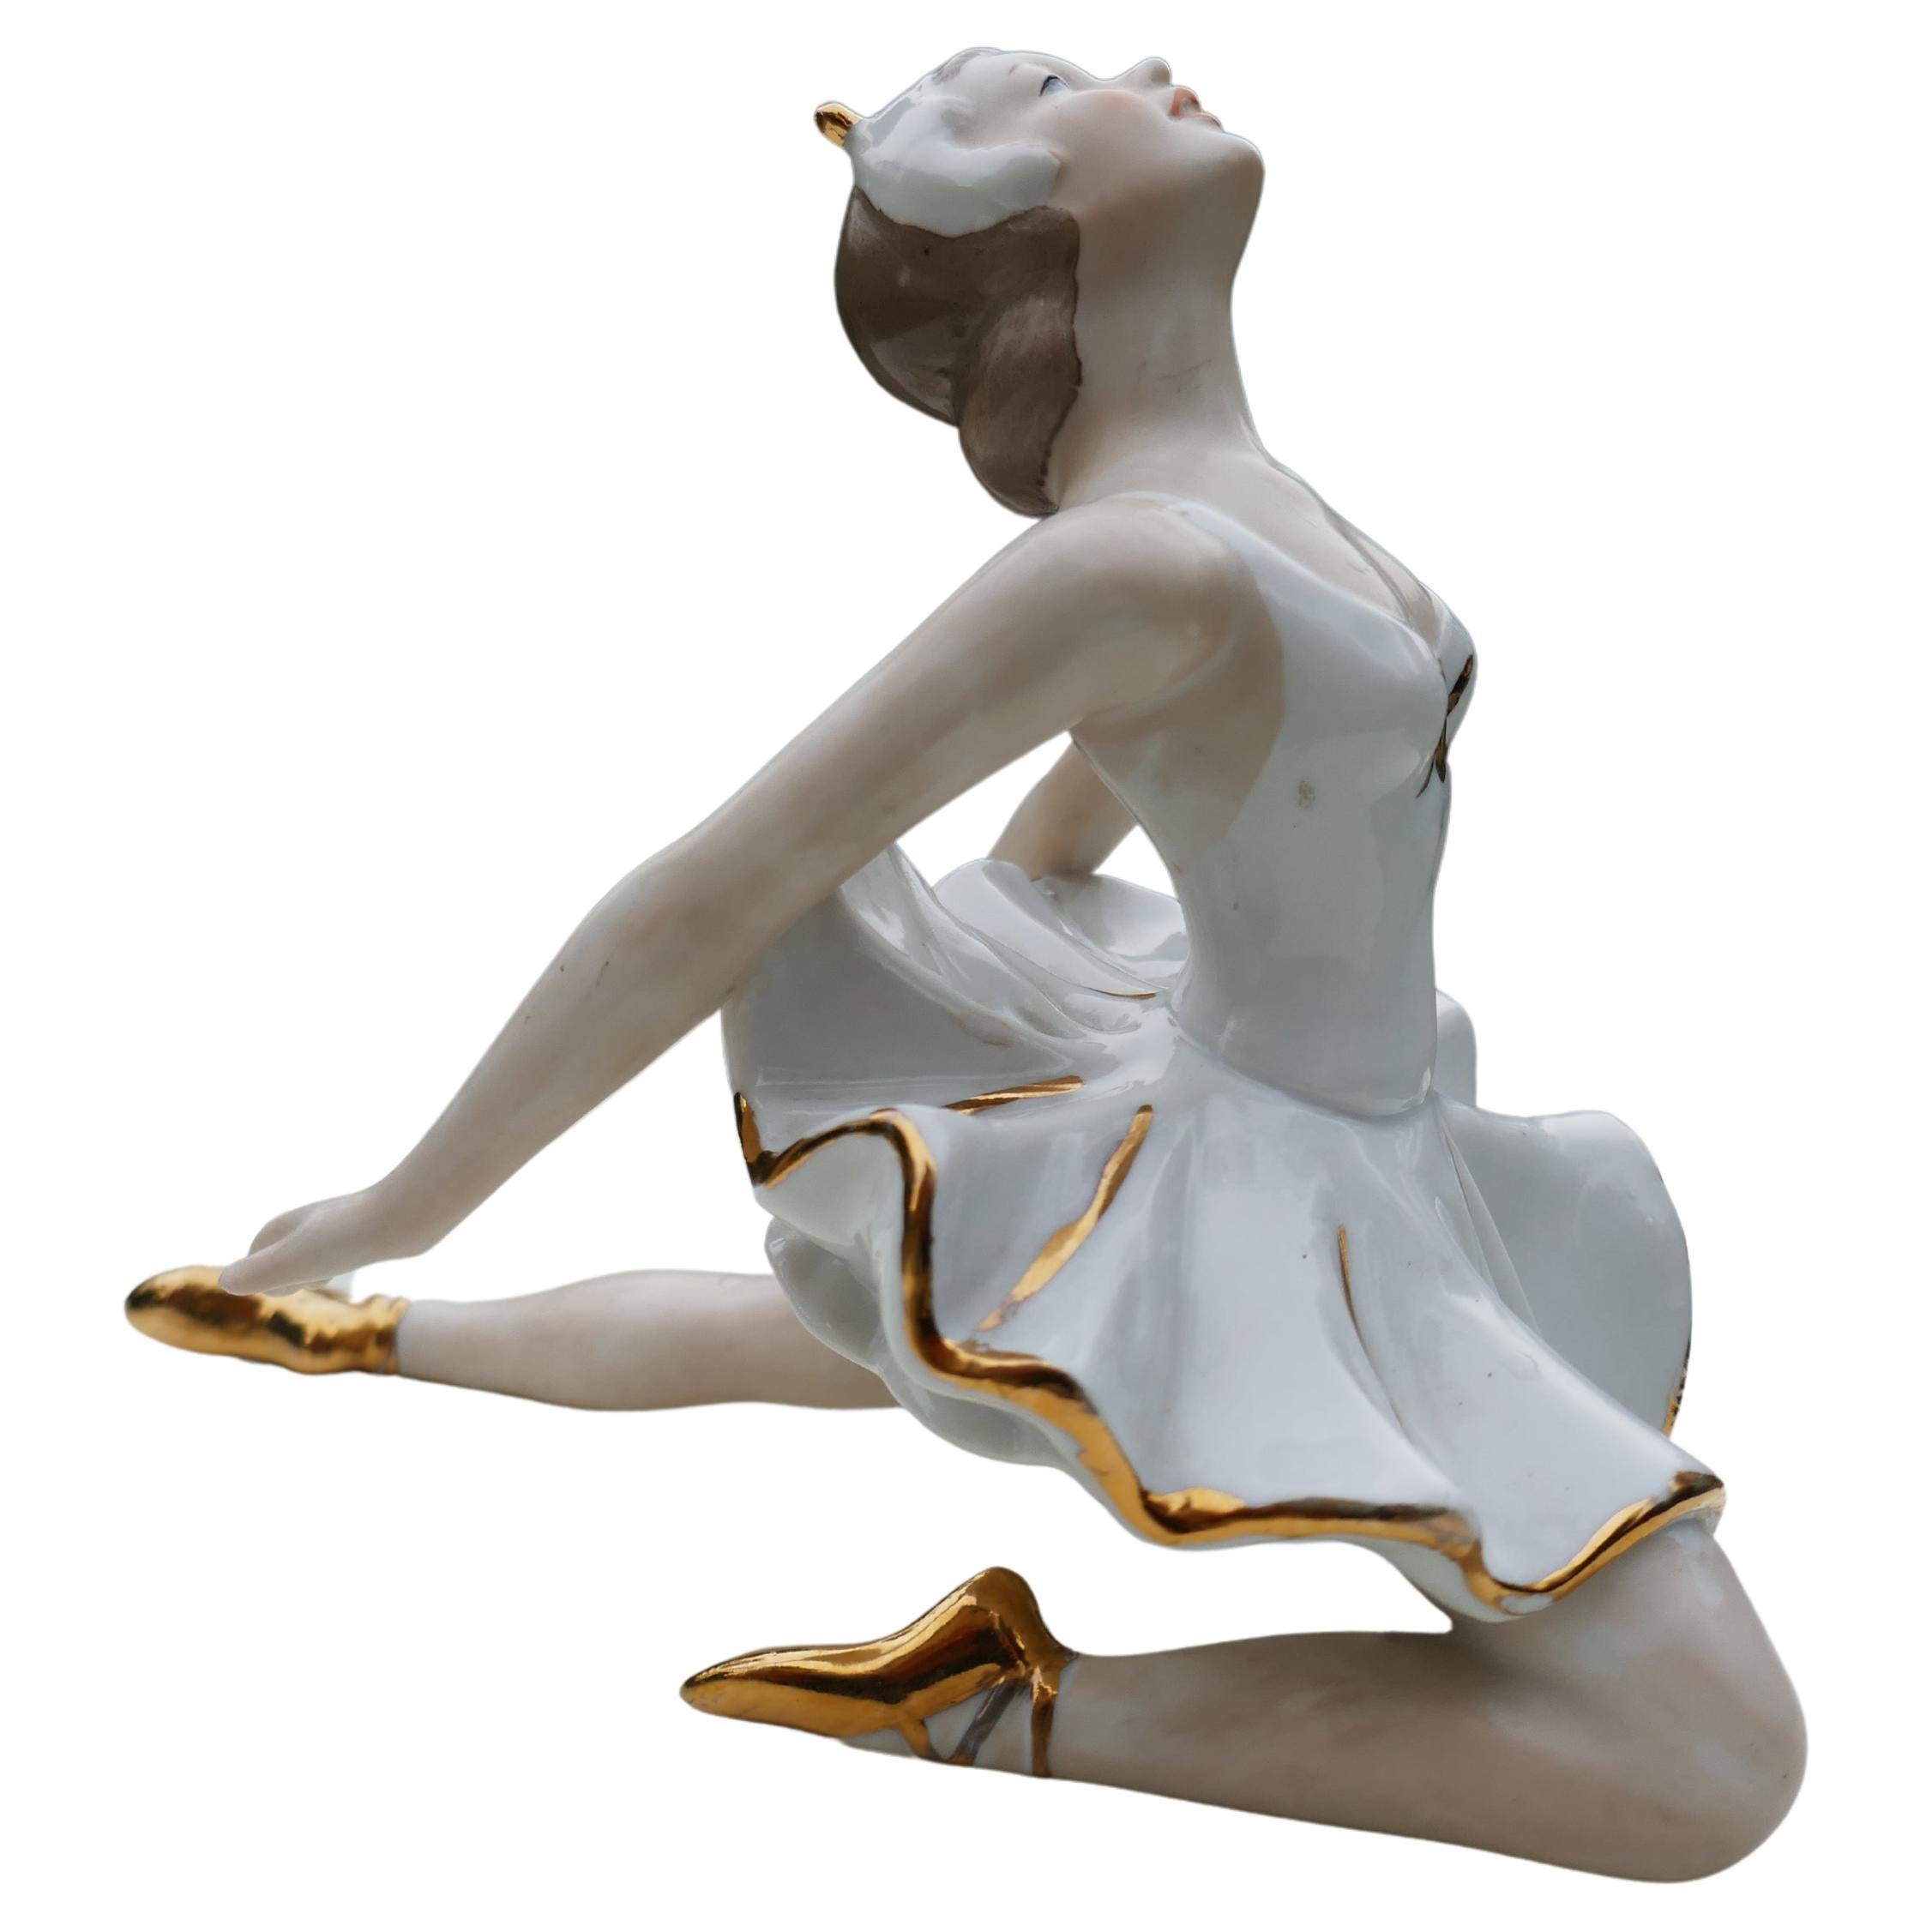 Ballerina dancing the ceramic Swan Lake romance.
Possible Wallendorf production
One piece of the crown is missing as pictured.
Thank you